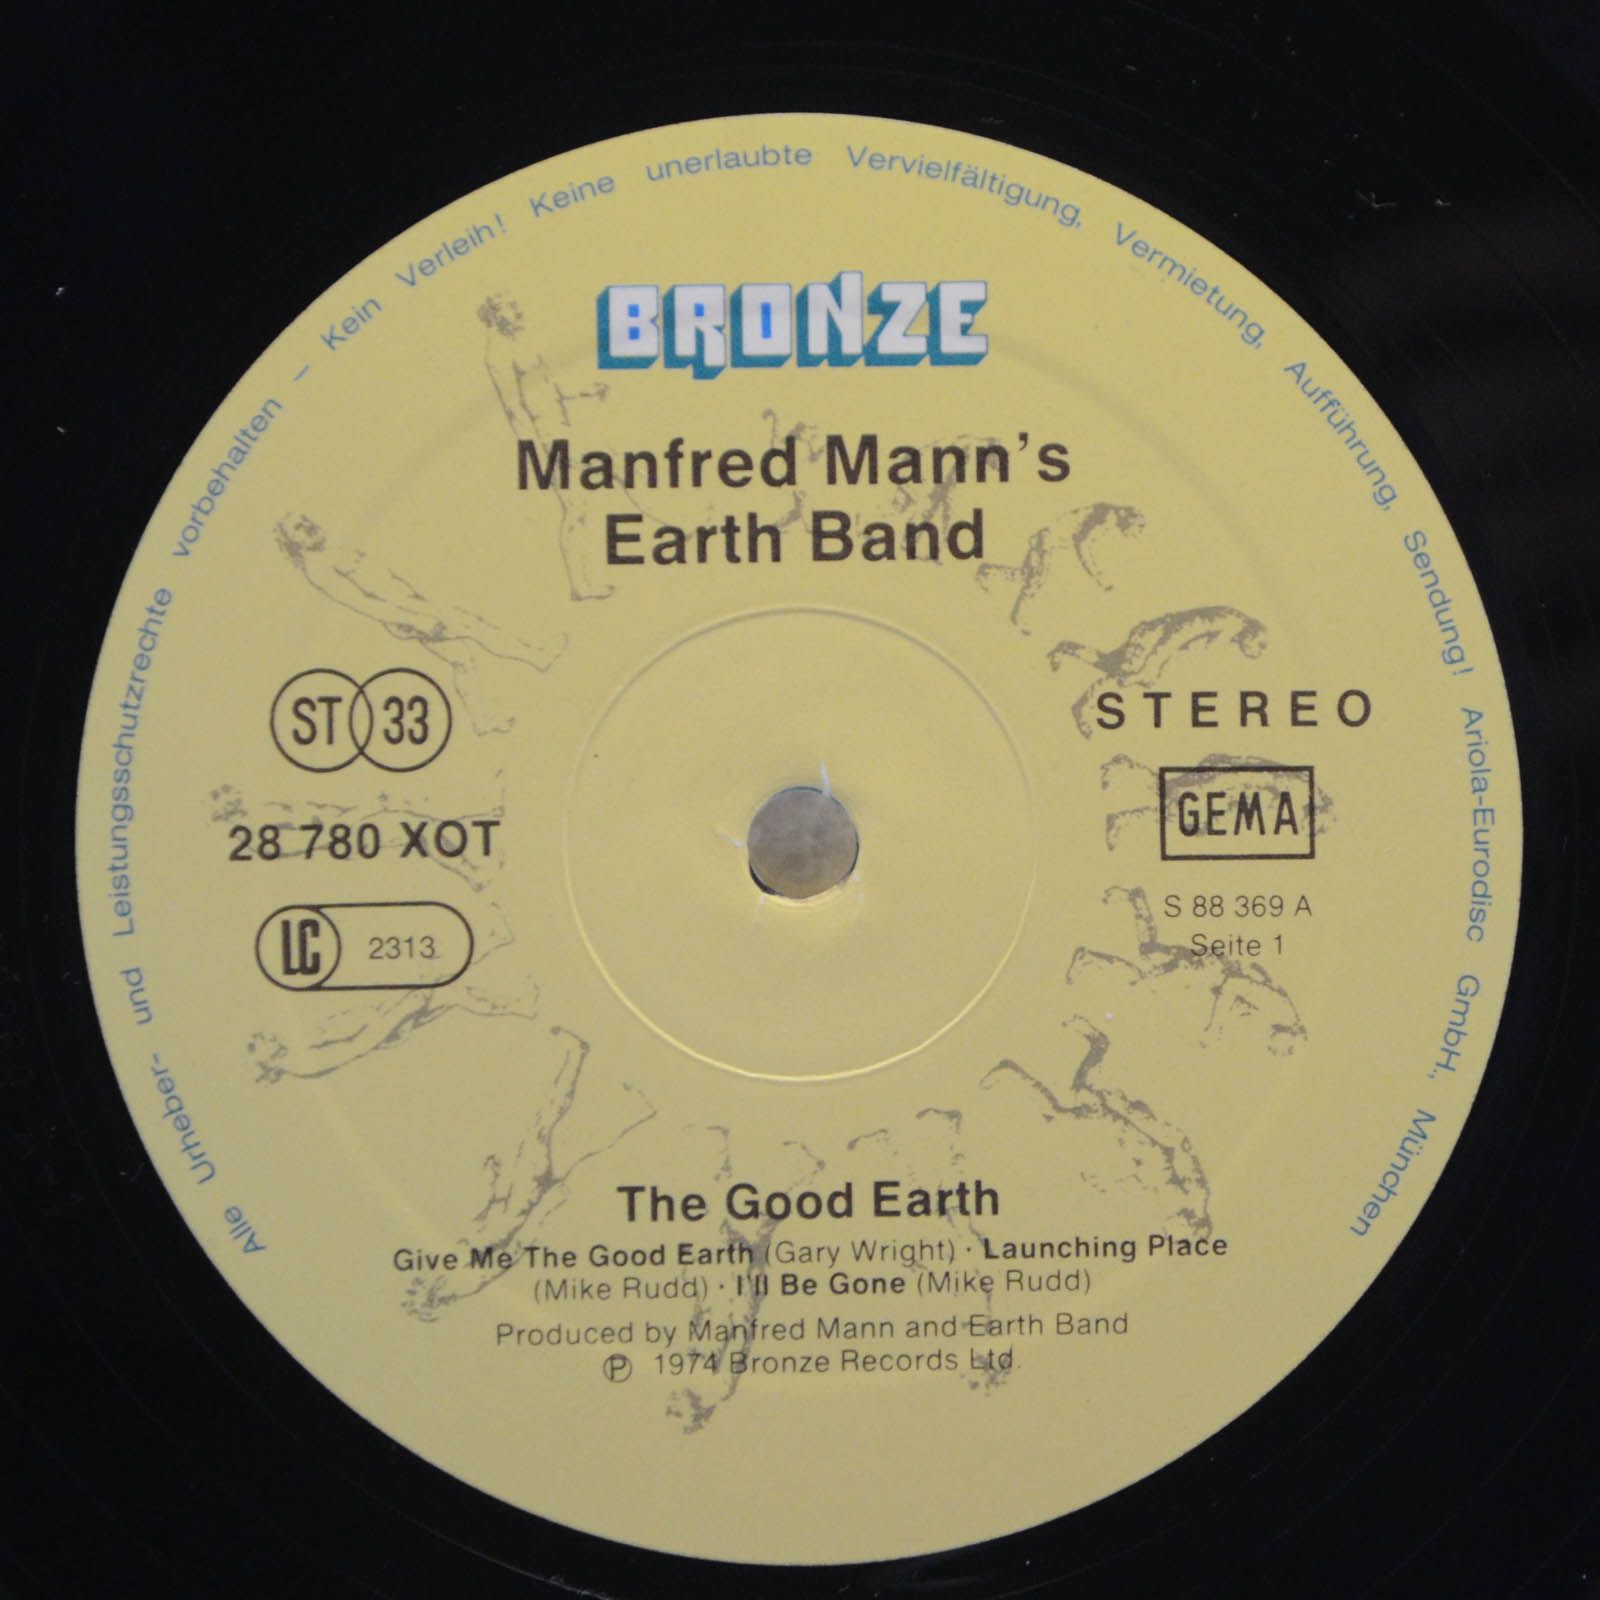 Manfred Mann's Earth Band — The Good Earth, 1973